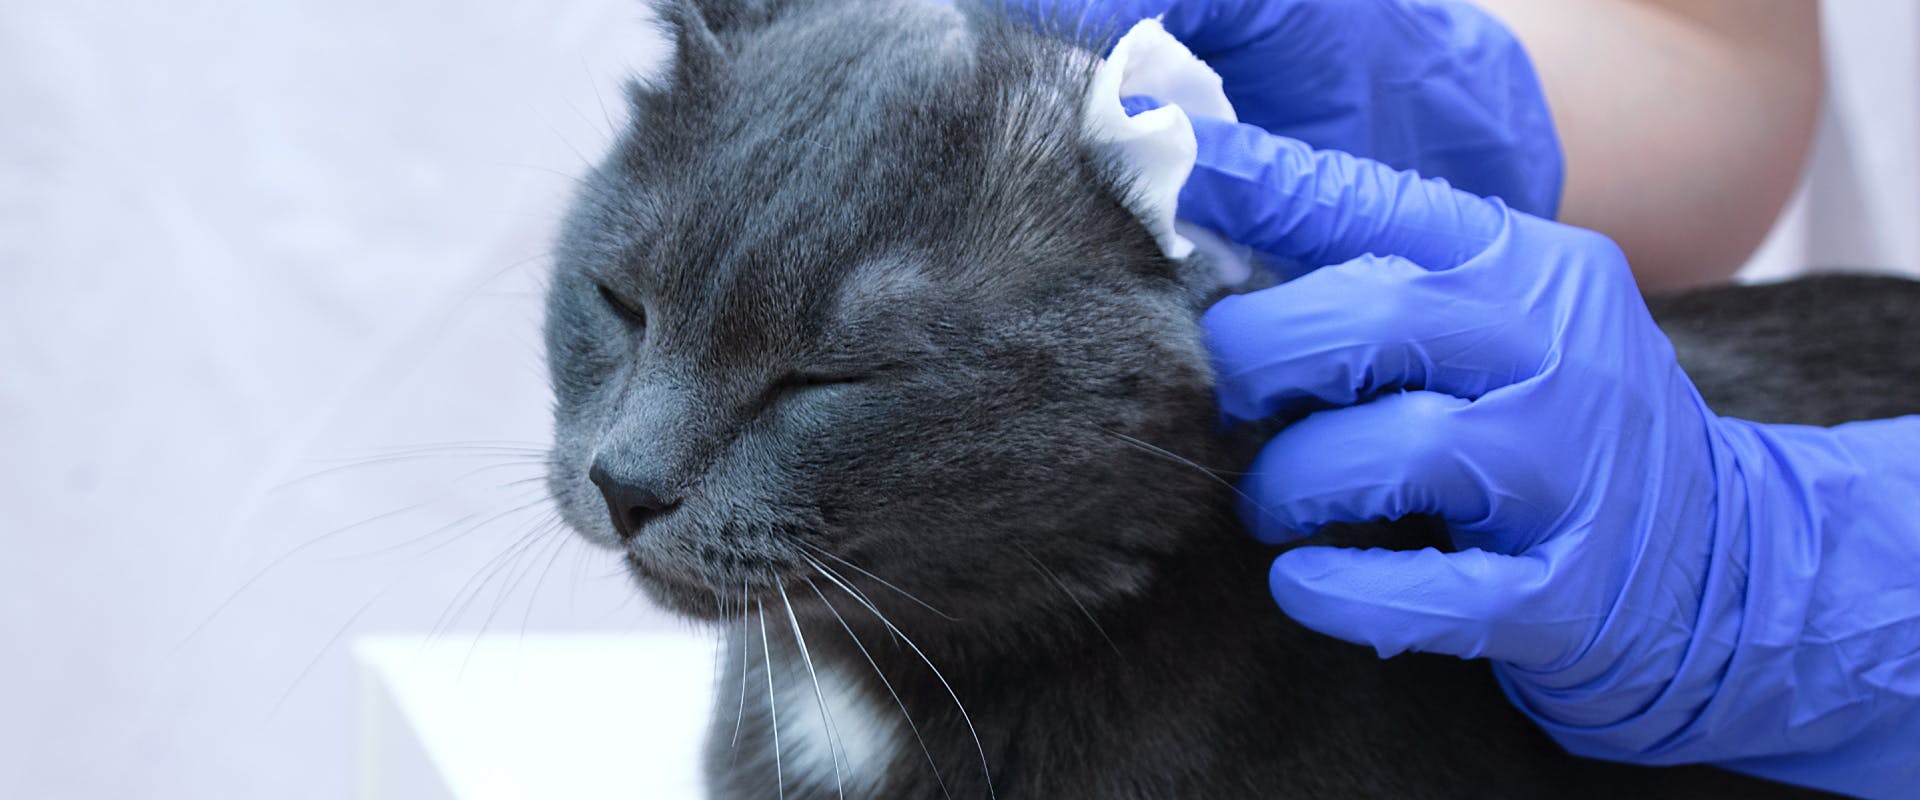 gray cat having their ear cleaned by a vet